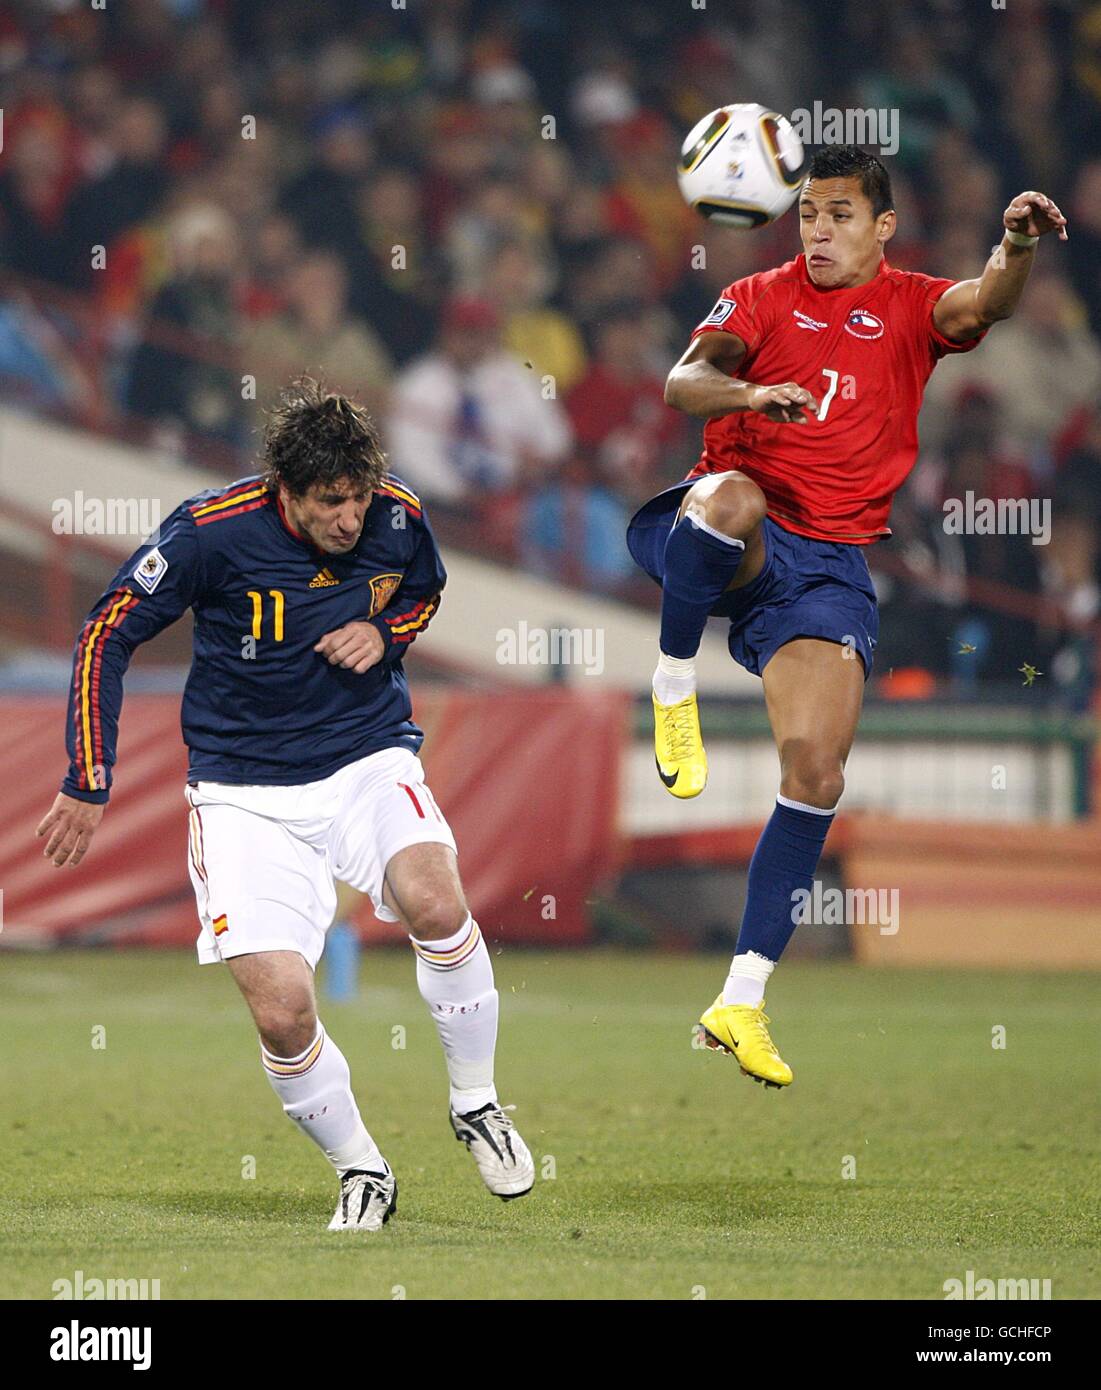 Chile's Alexis Sanchez (right) and Spain's Joan Capdevila (left) battle for the ball Stock Photo